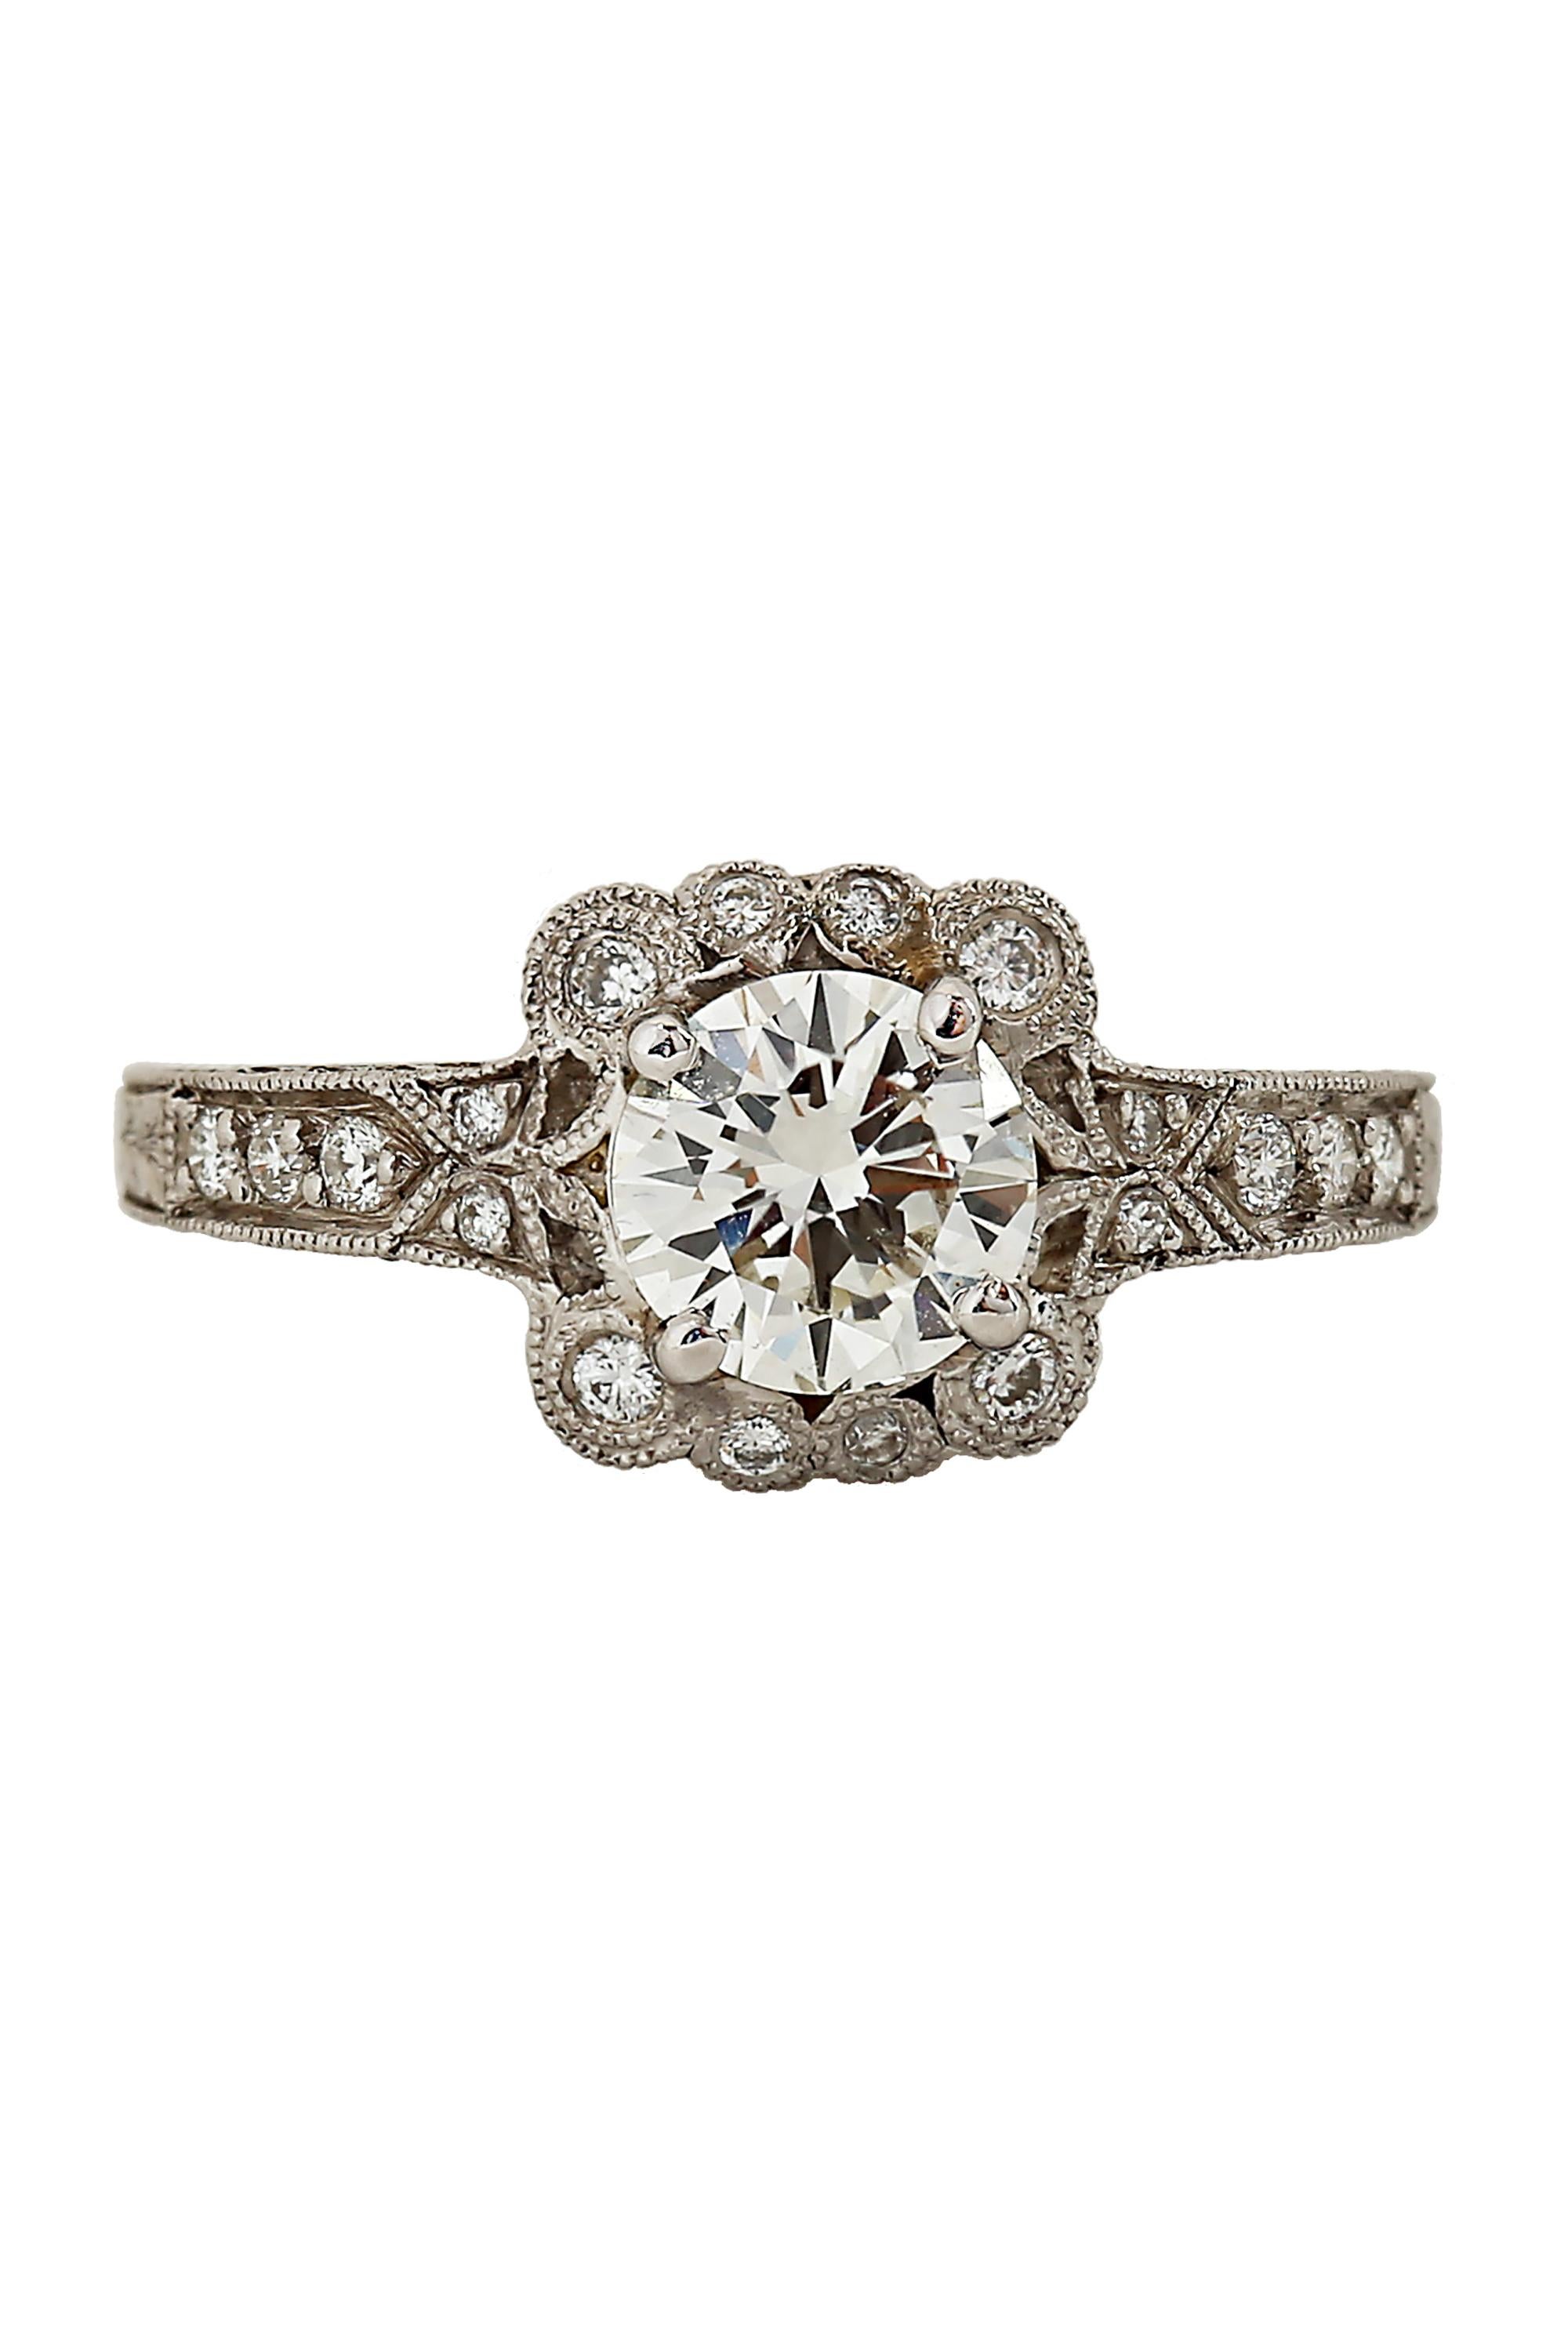 Art Deco 1.10 Carat Diamond Platinum Ring In Good Condition For Sale In beverly hills, CA